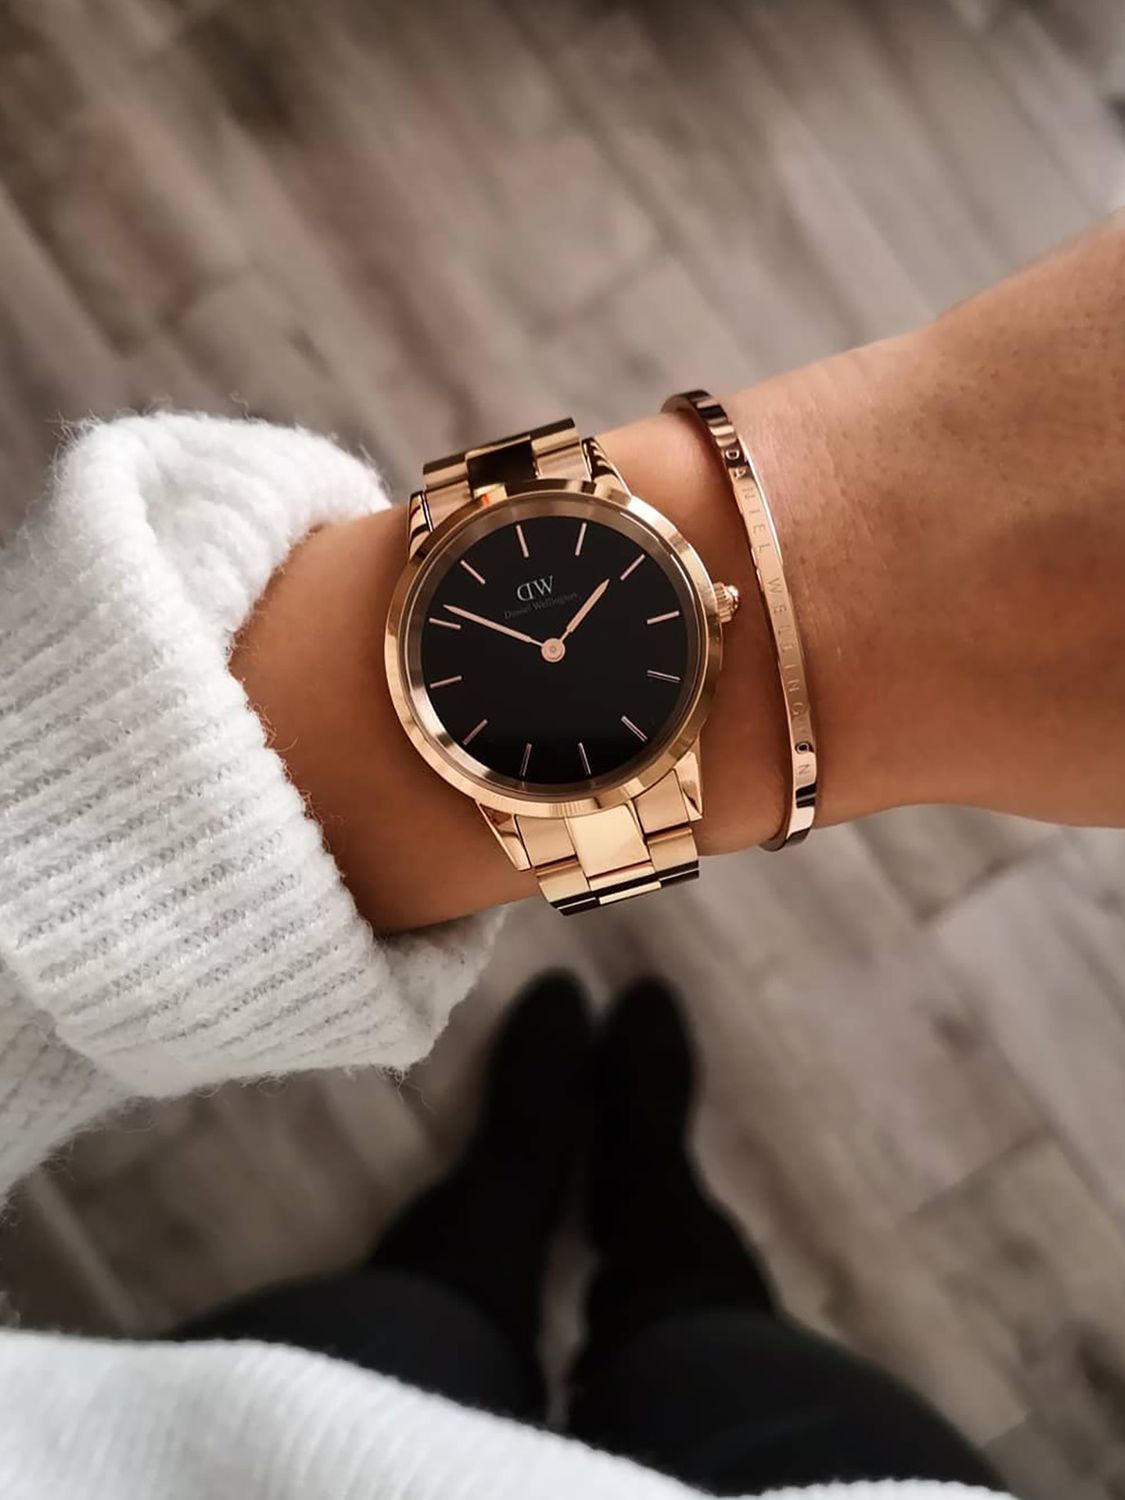 Shop the most elegant and beautiful ladies watches